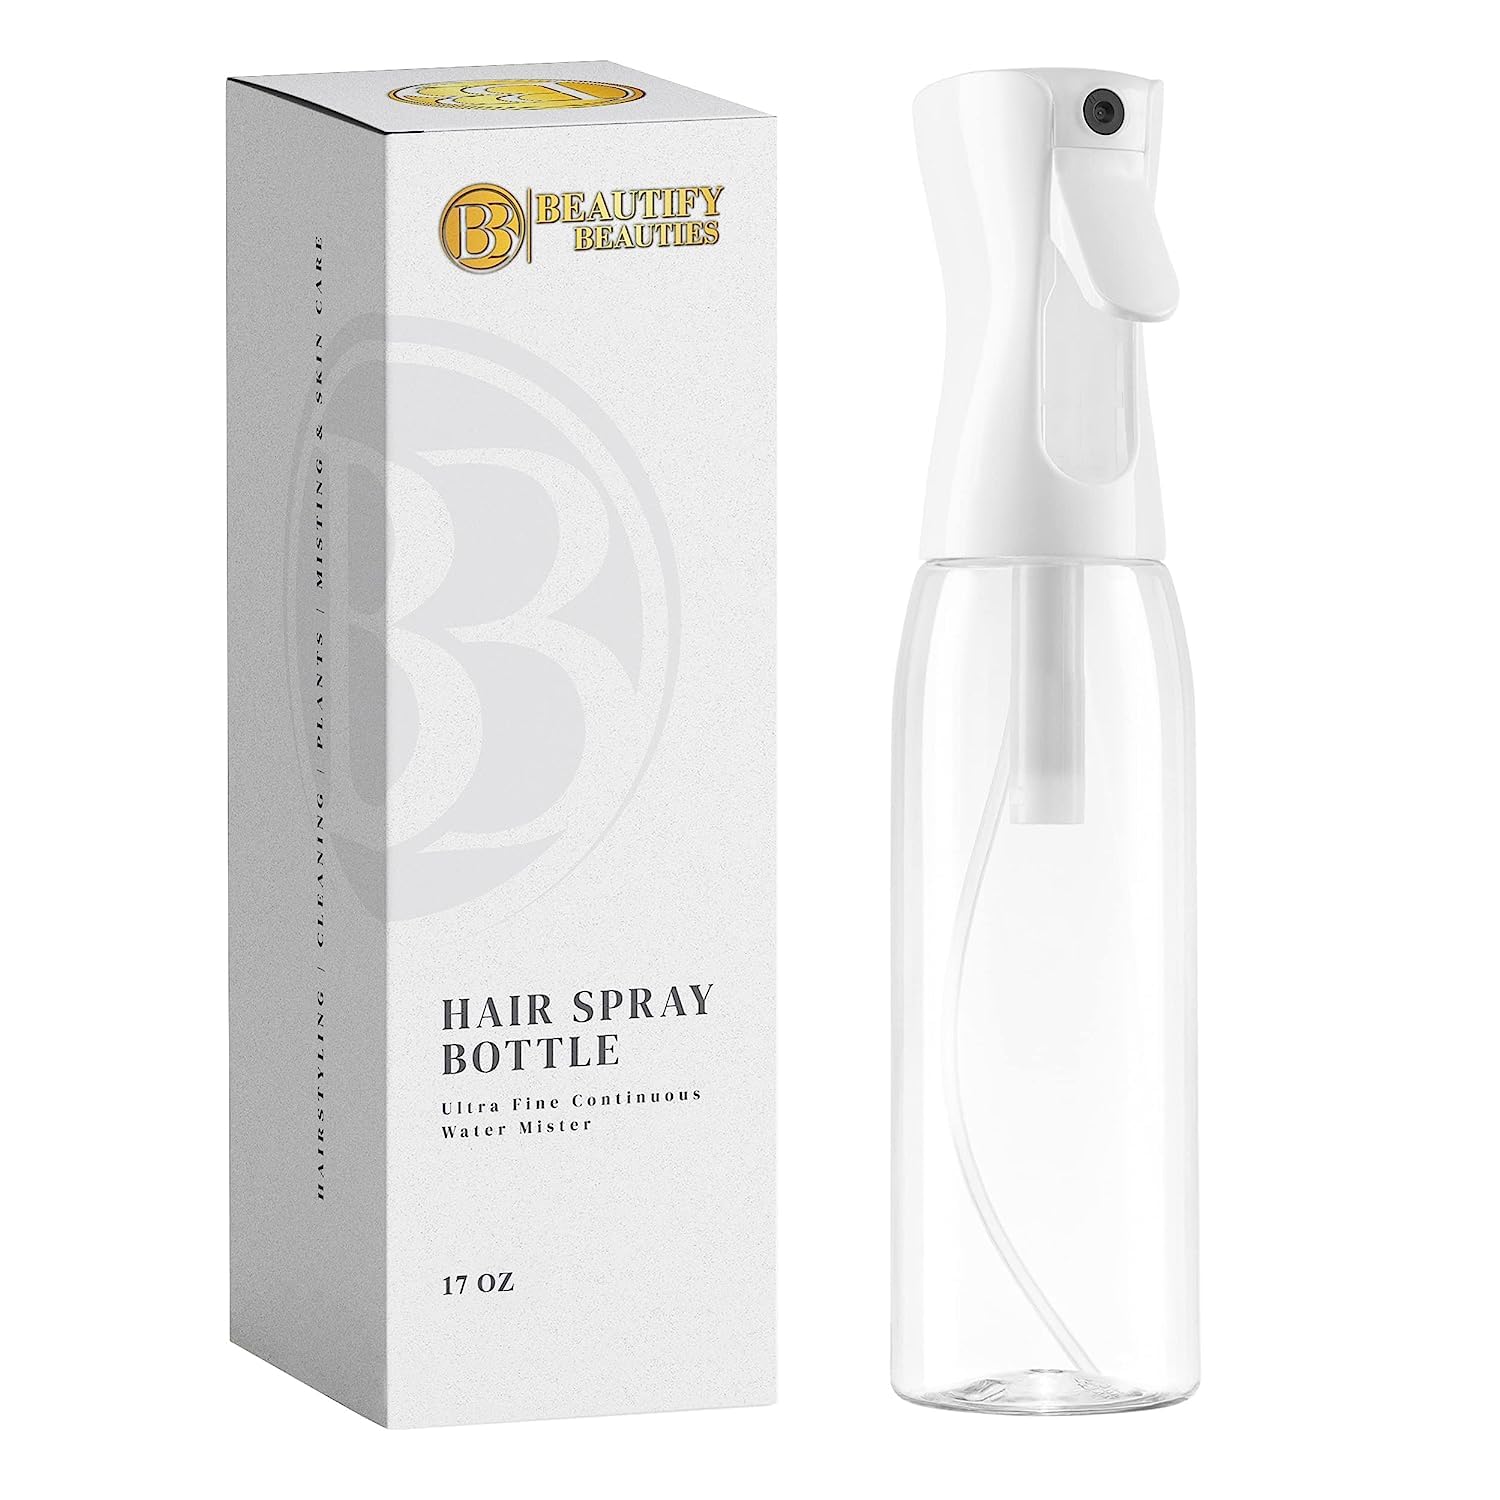 BeautifyBeauties Hair Spray Bottle – Ultra Fine Continuous Water Mister for Hairstyling, Cleaning, Plants, Misting & Skin Care (17 oz/503ml) $7.49